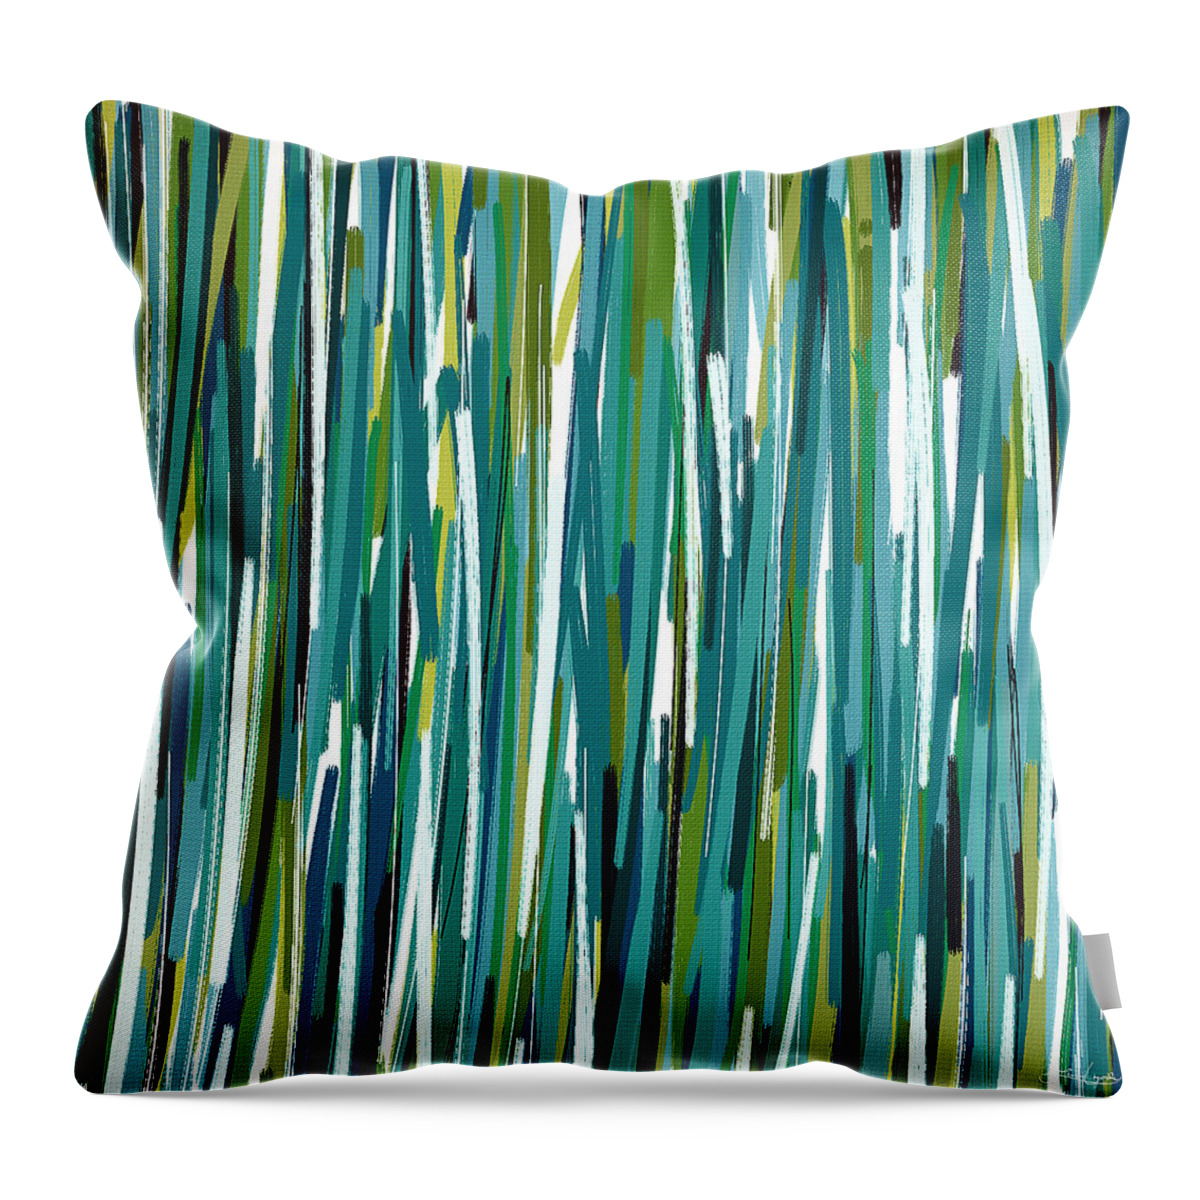 Turquoise Throw Pillow featuring the painting Energy Rises by Lourry Legarde